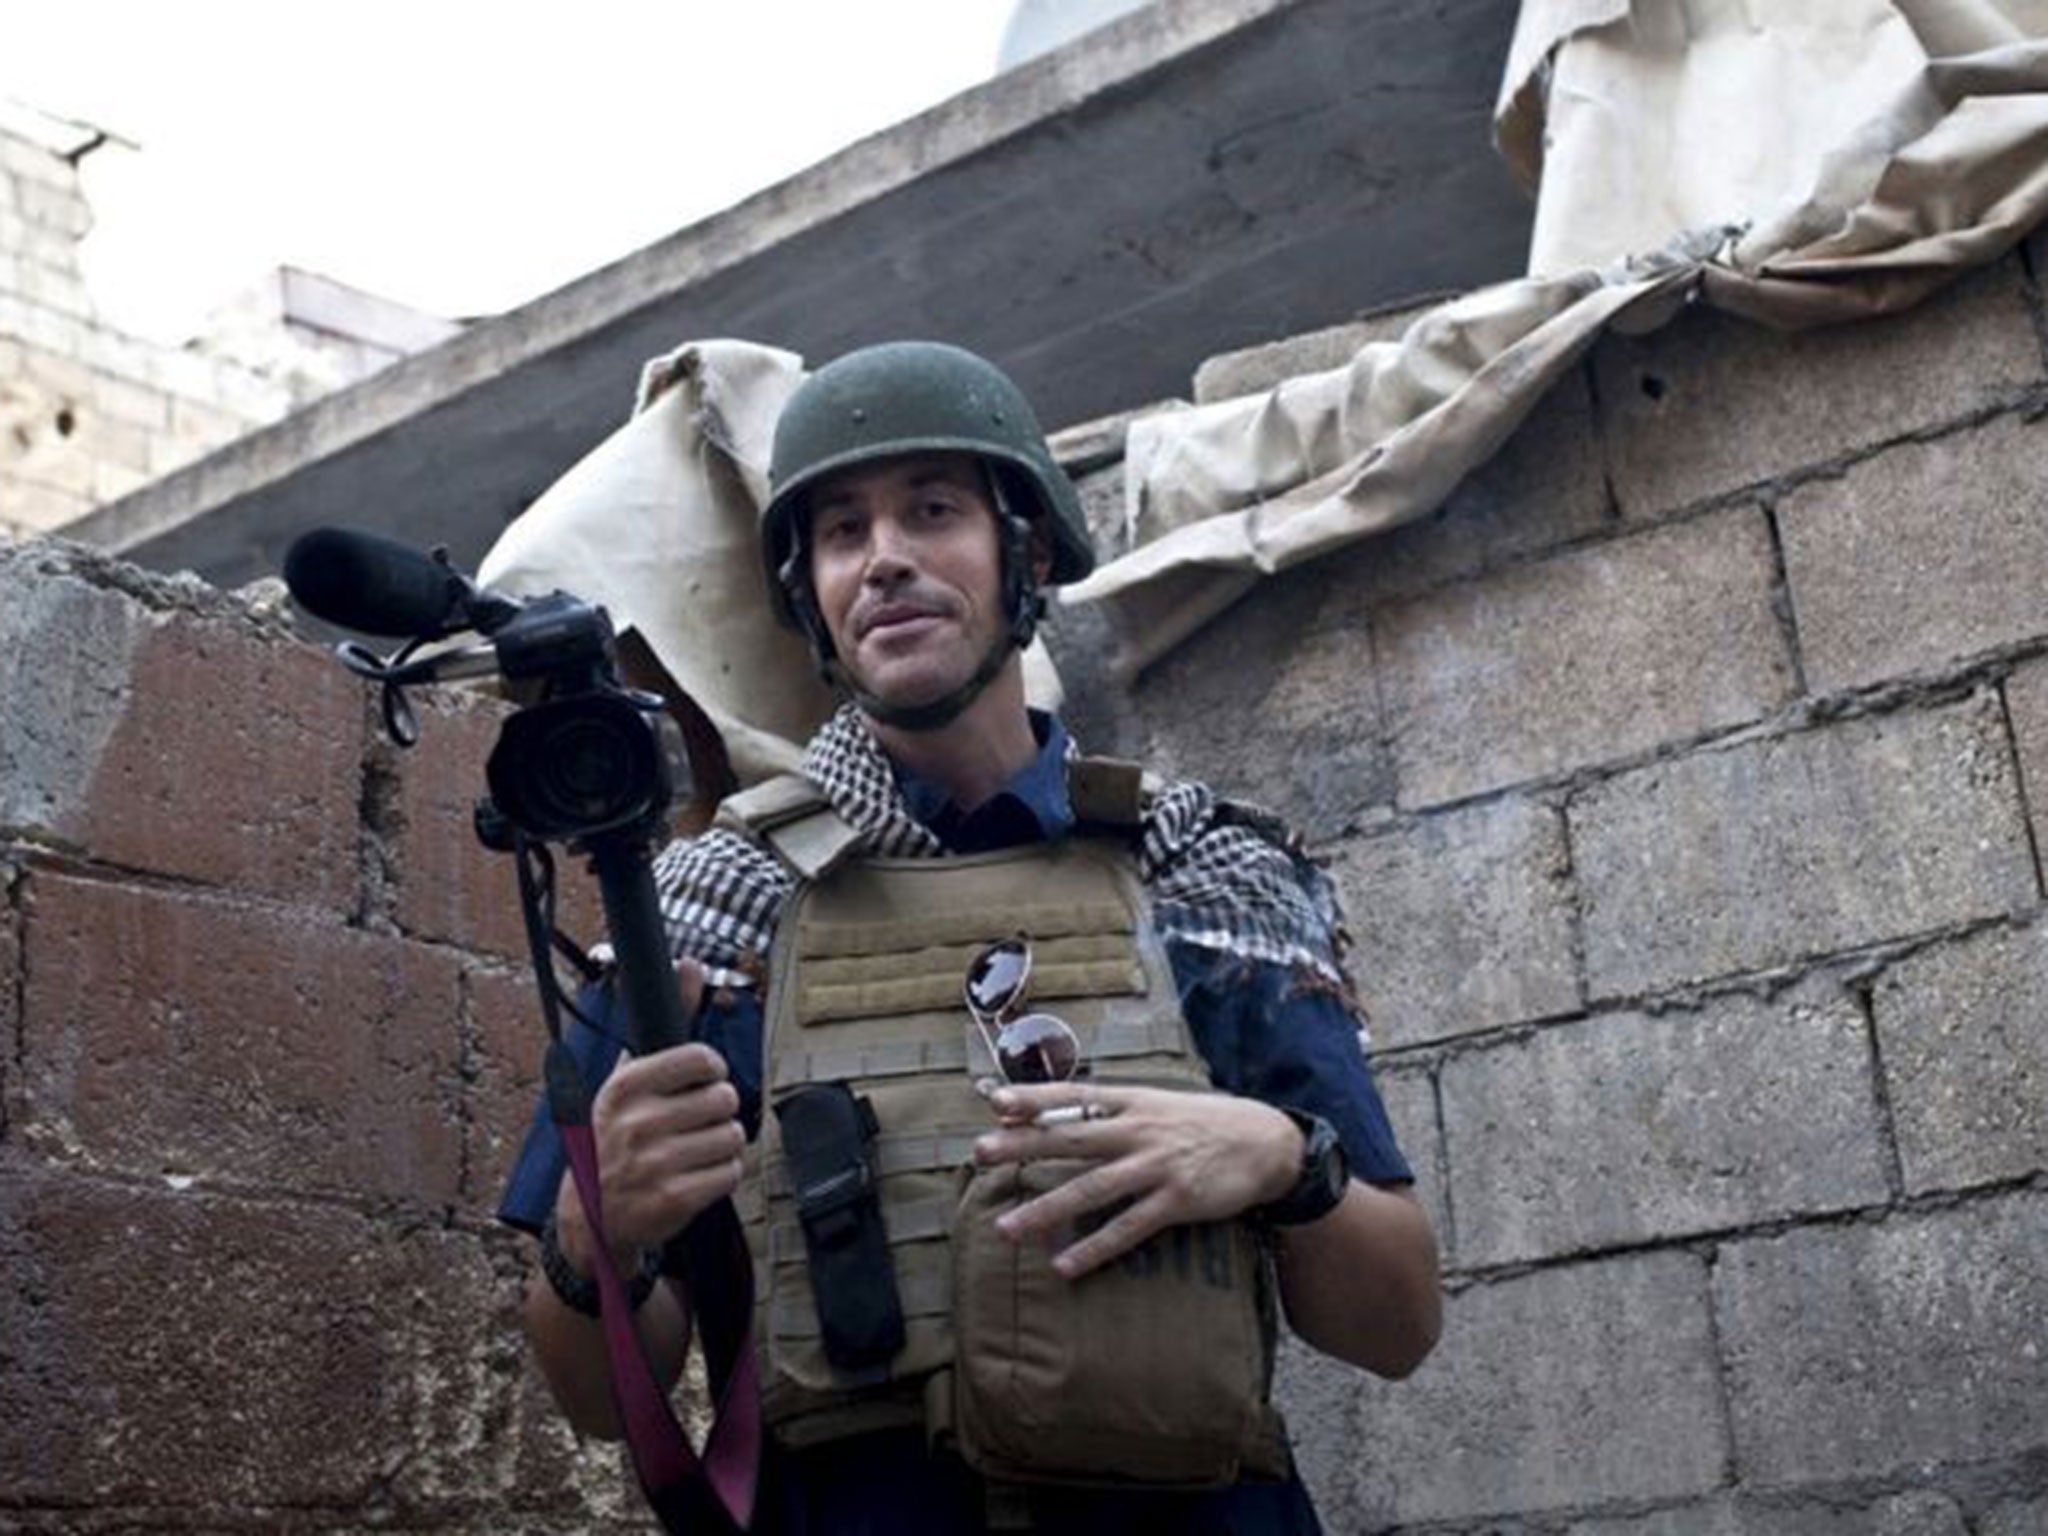 James Foley was kidnapped near Aleppo, Syria, with another journalist in 2012